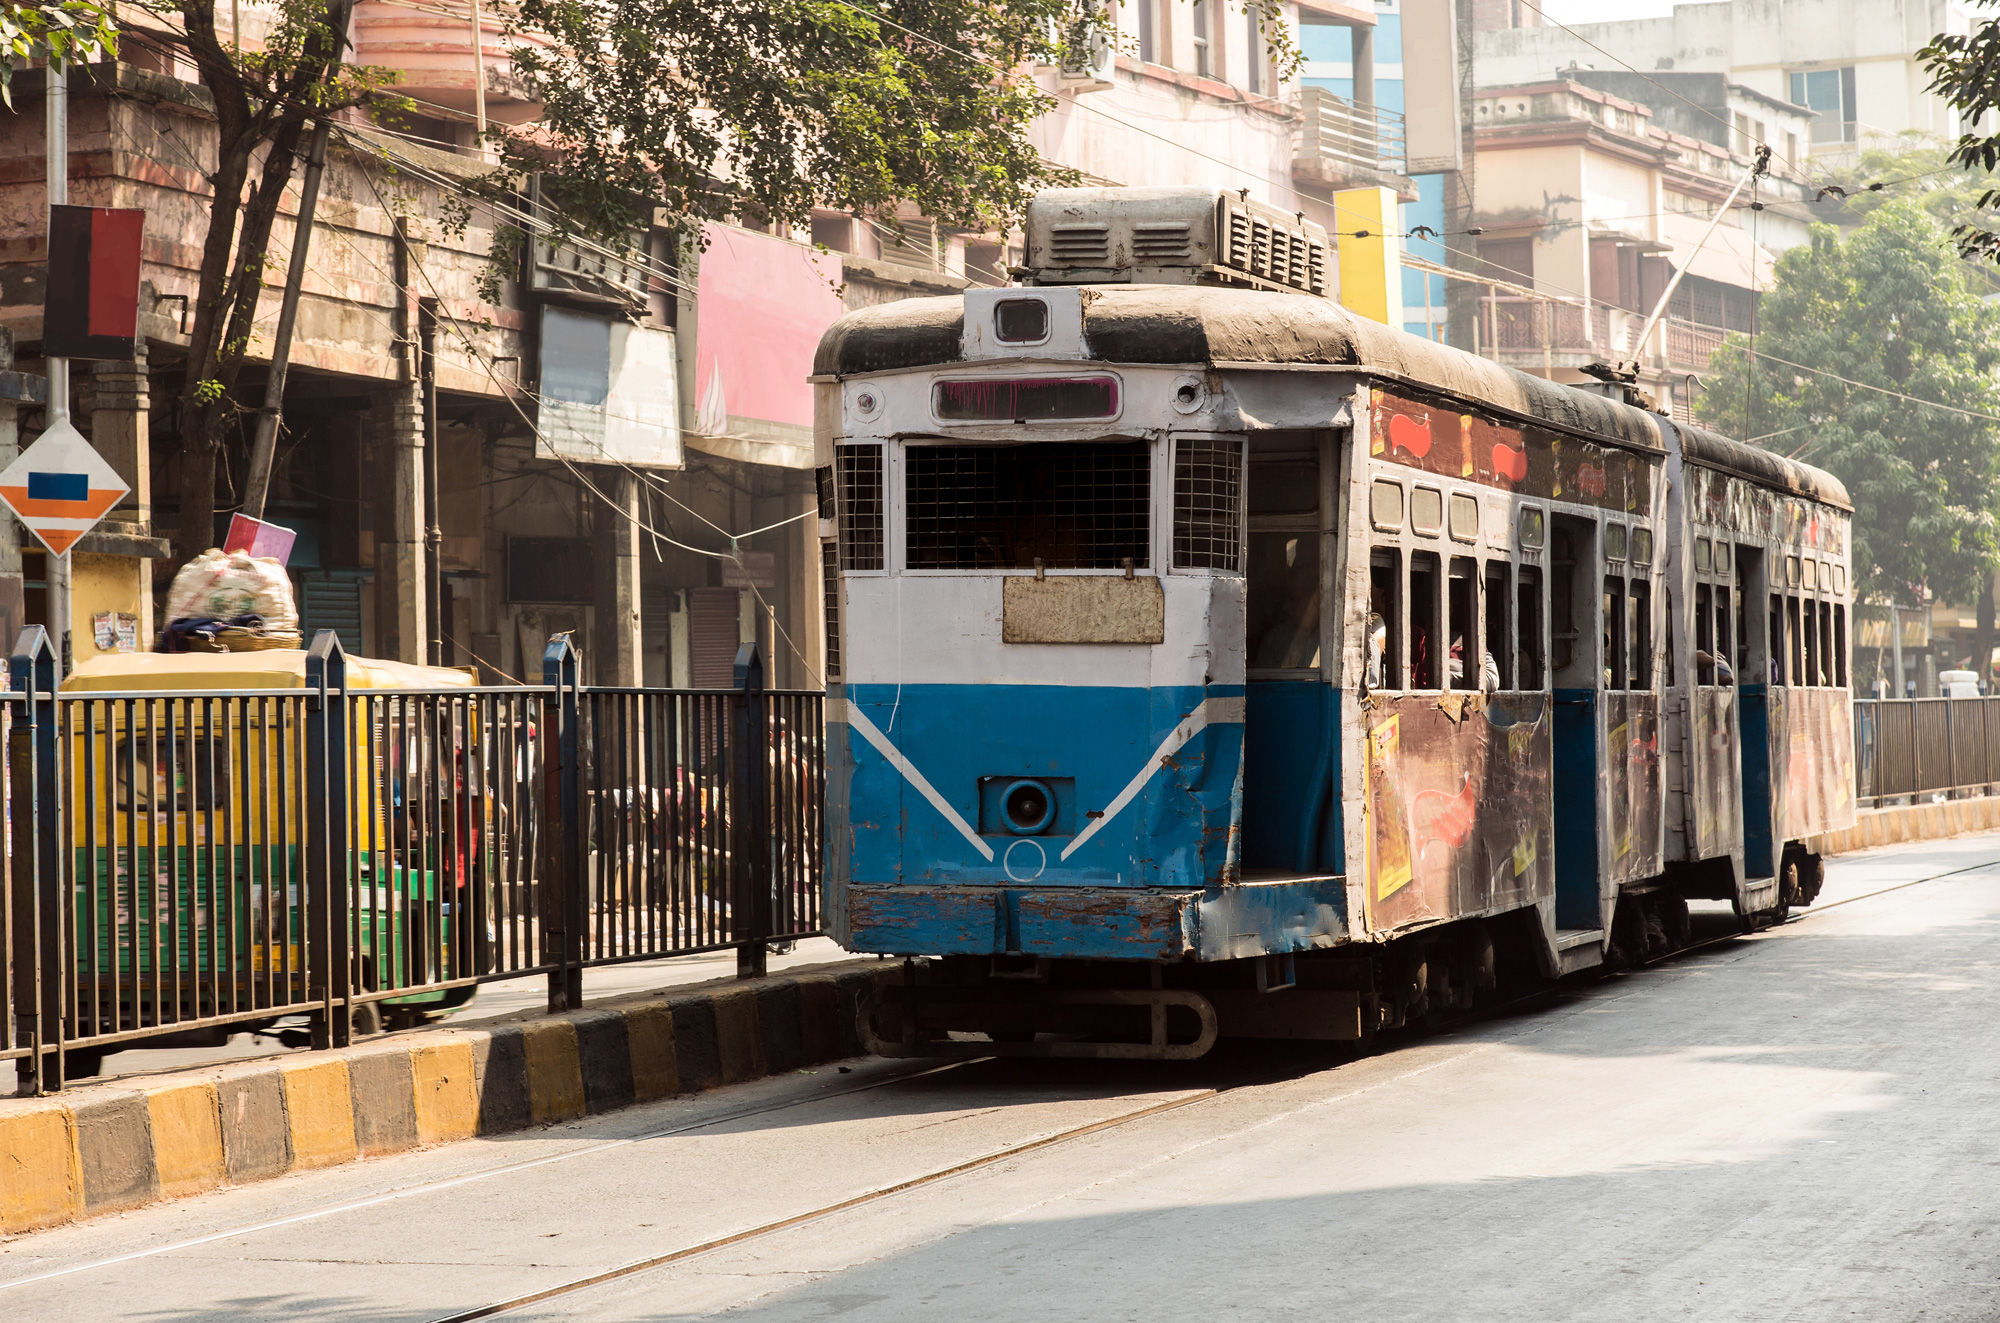 A decrepit tram car in Calcutta, which has been easing out the green transport.